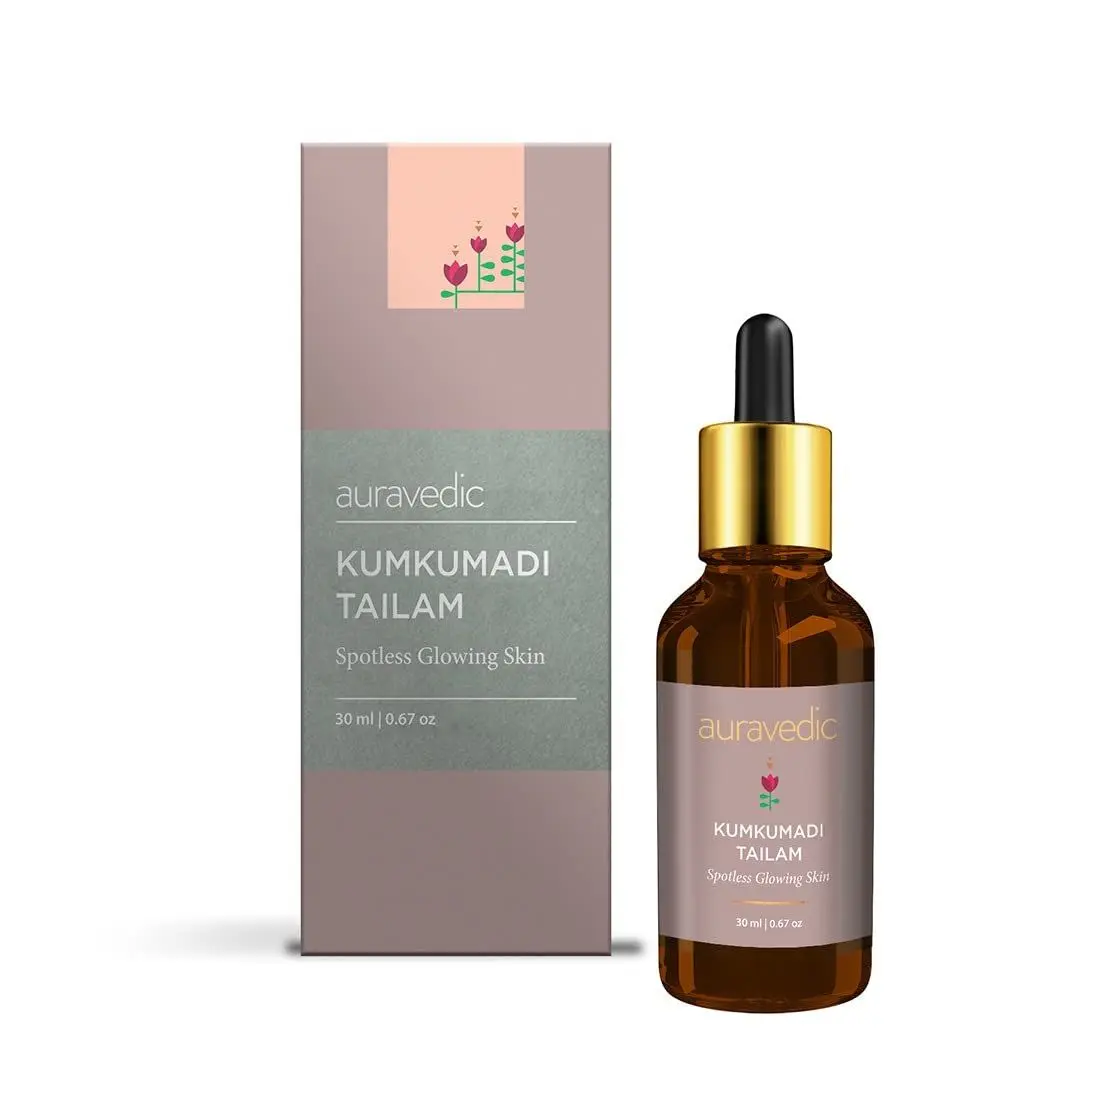 Auravedic kumkumadi tailam kumkumadi face oil for glowing skin. Pure luxuriously smooth kumkumadi oil for a brighter everyday glow infused with real saffron oil. kumkumadi tailam for face for women ,men 30ml